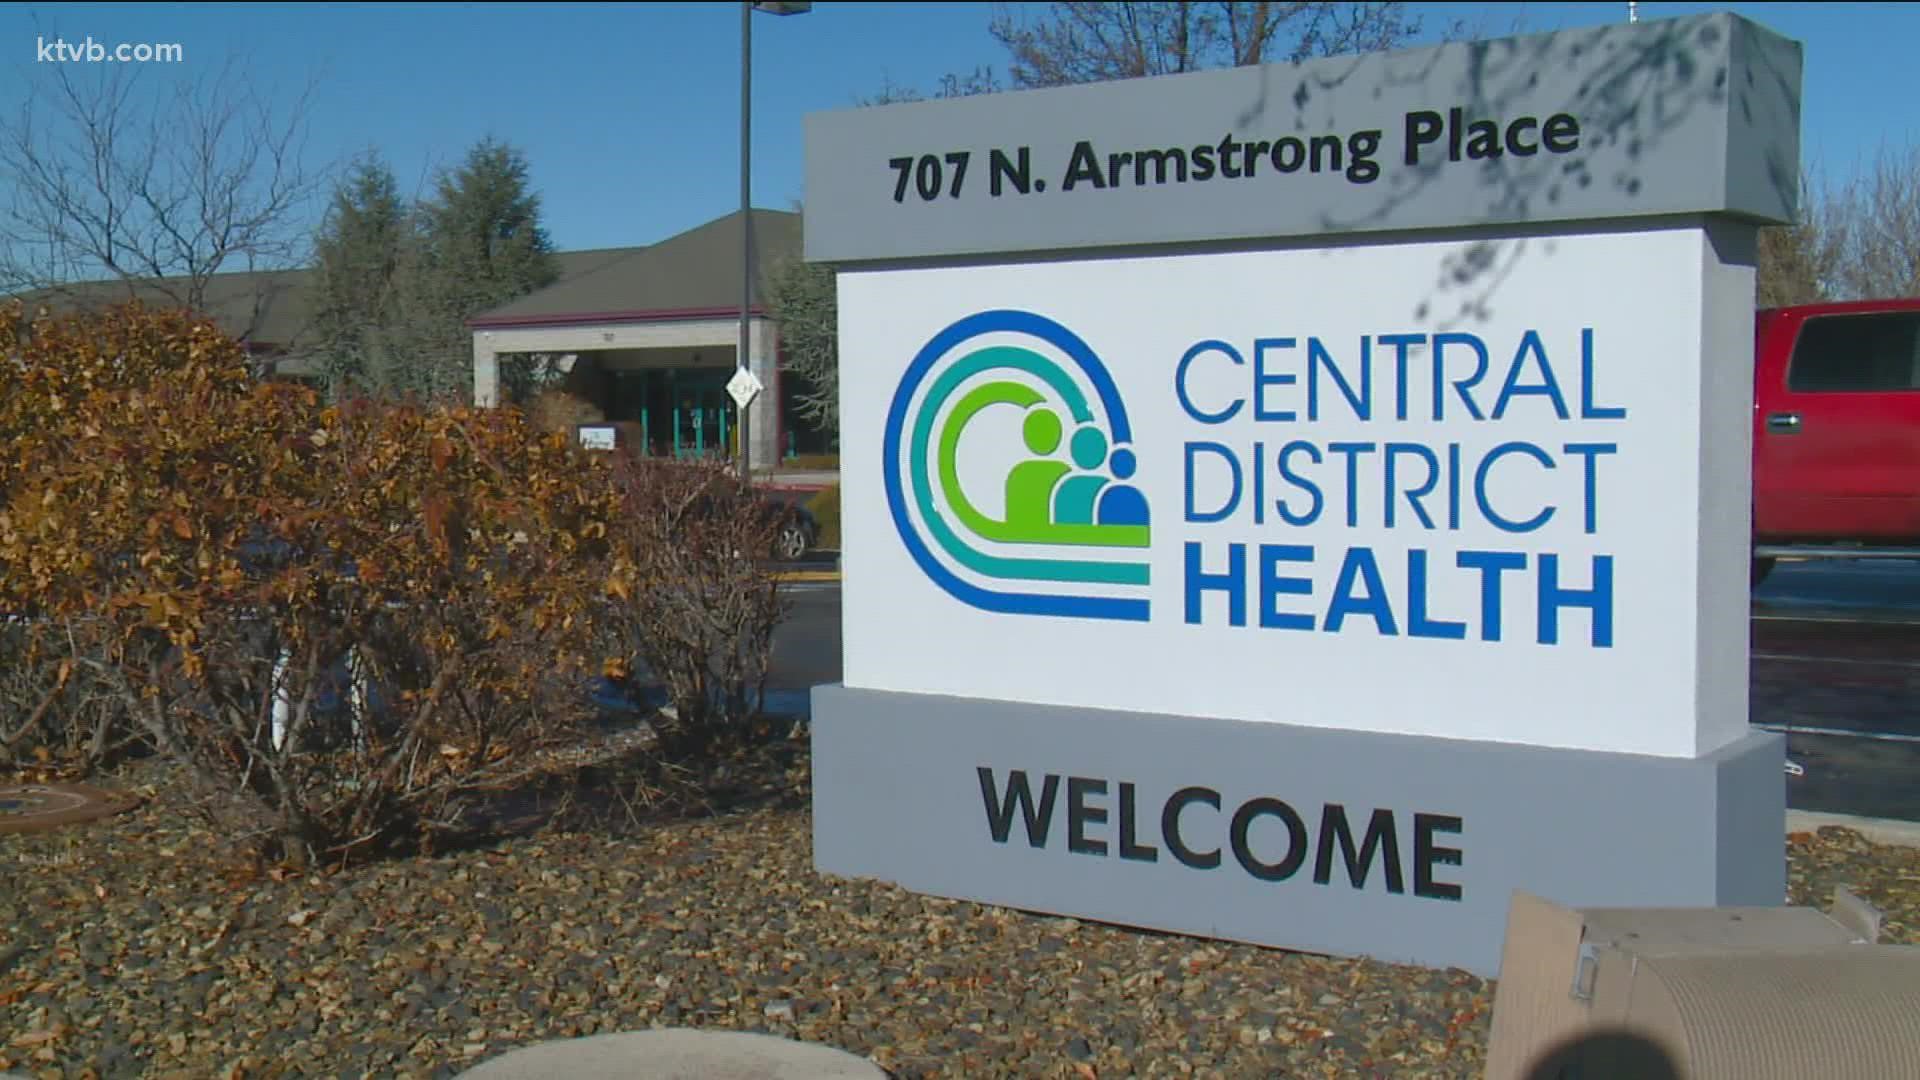 Both the wastewater viral load and CDH case counts have trended downward for more than a month. Idaho health leaders are pleased with these downward trends.